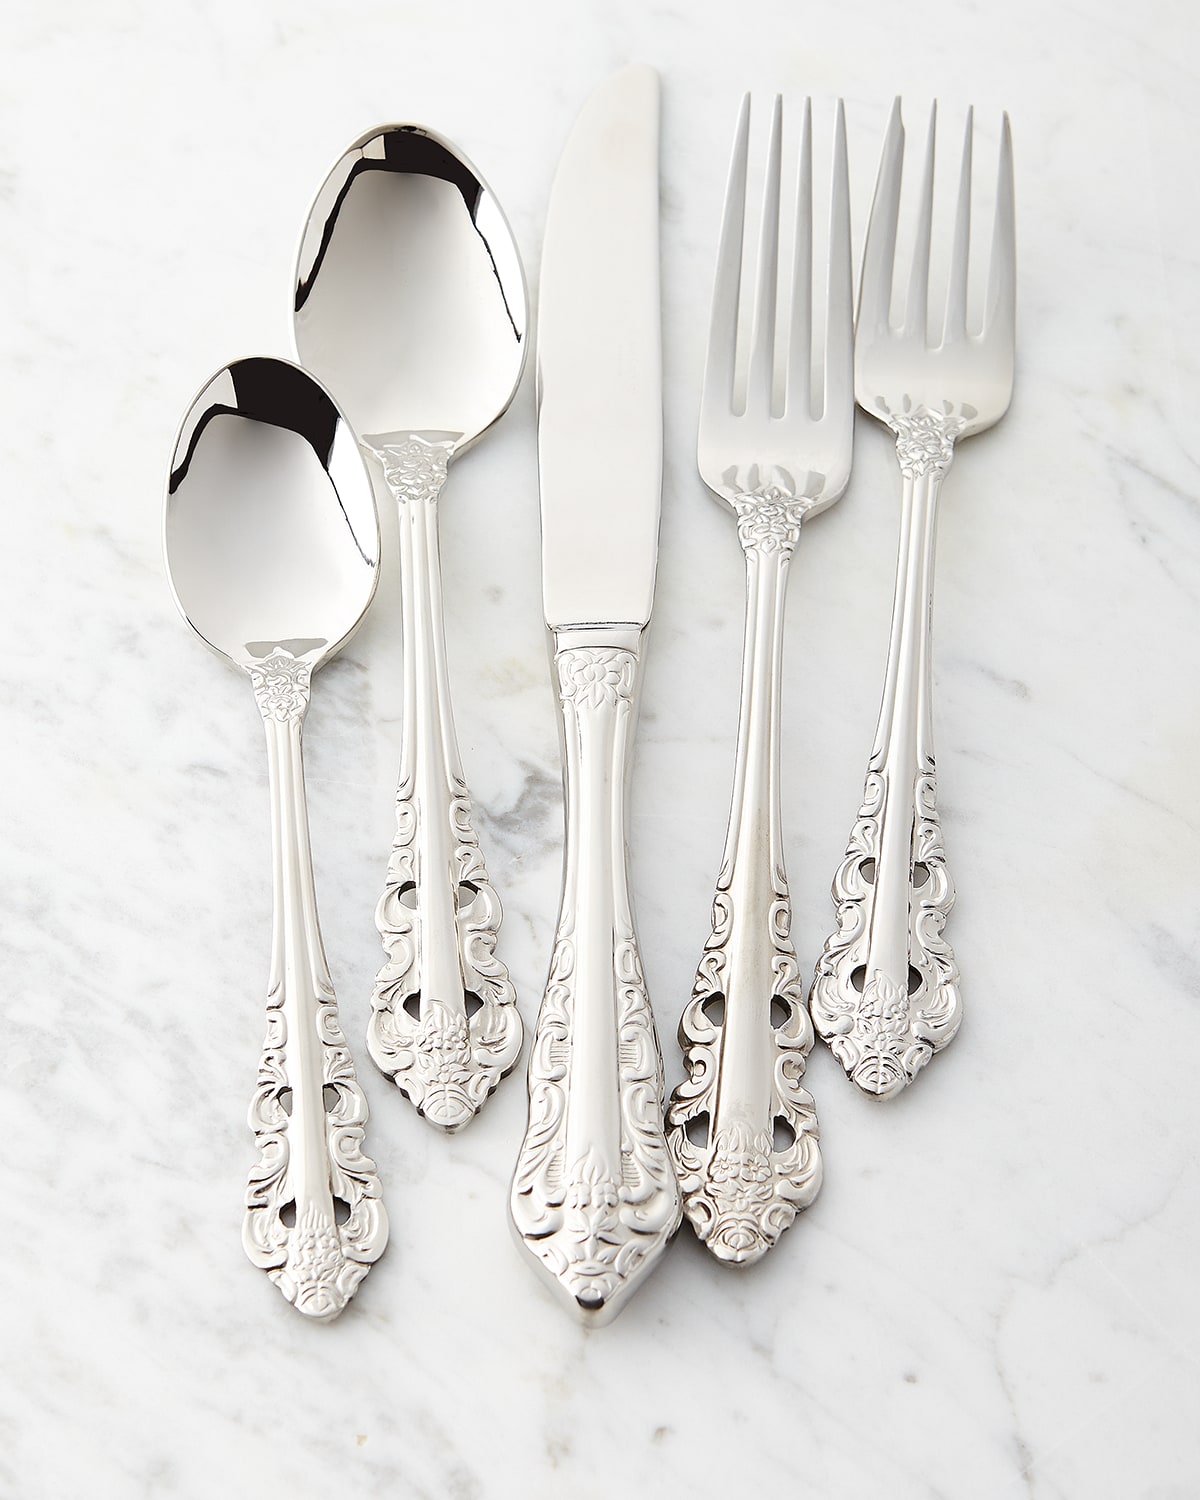 Image Wallace Silversmiths 5-Piece Antique Baroque Flatware Place Setting